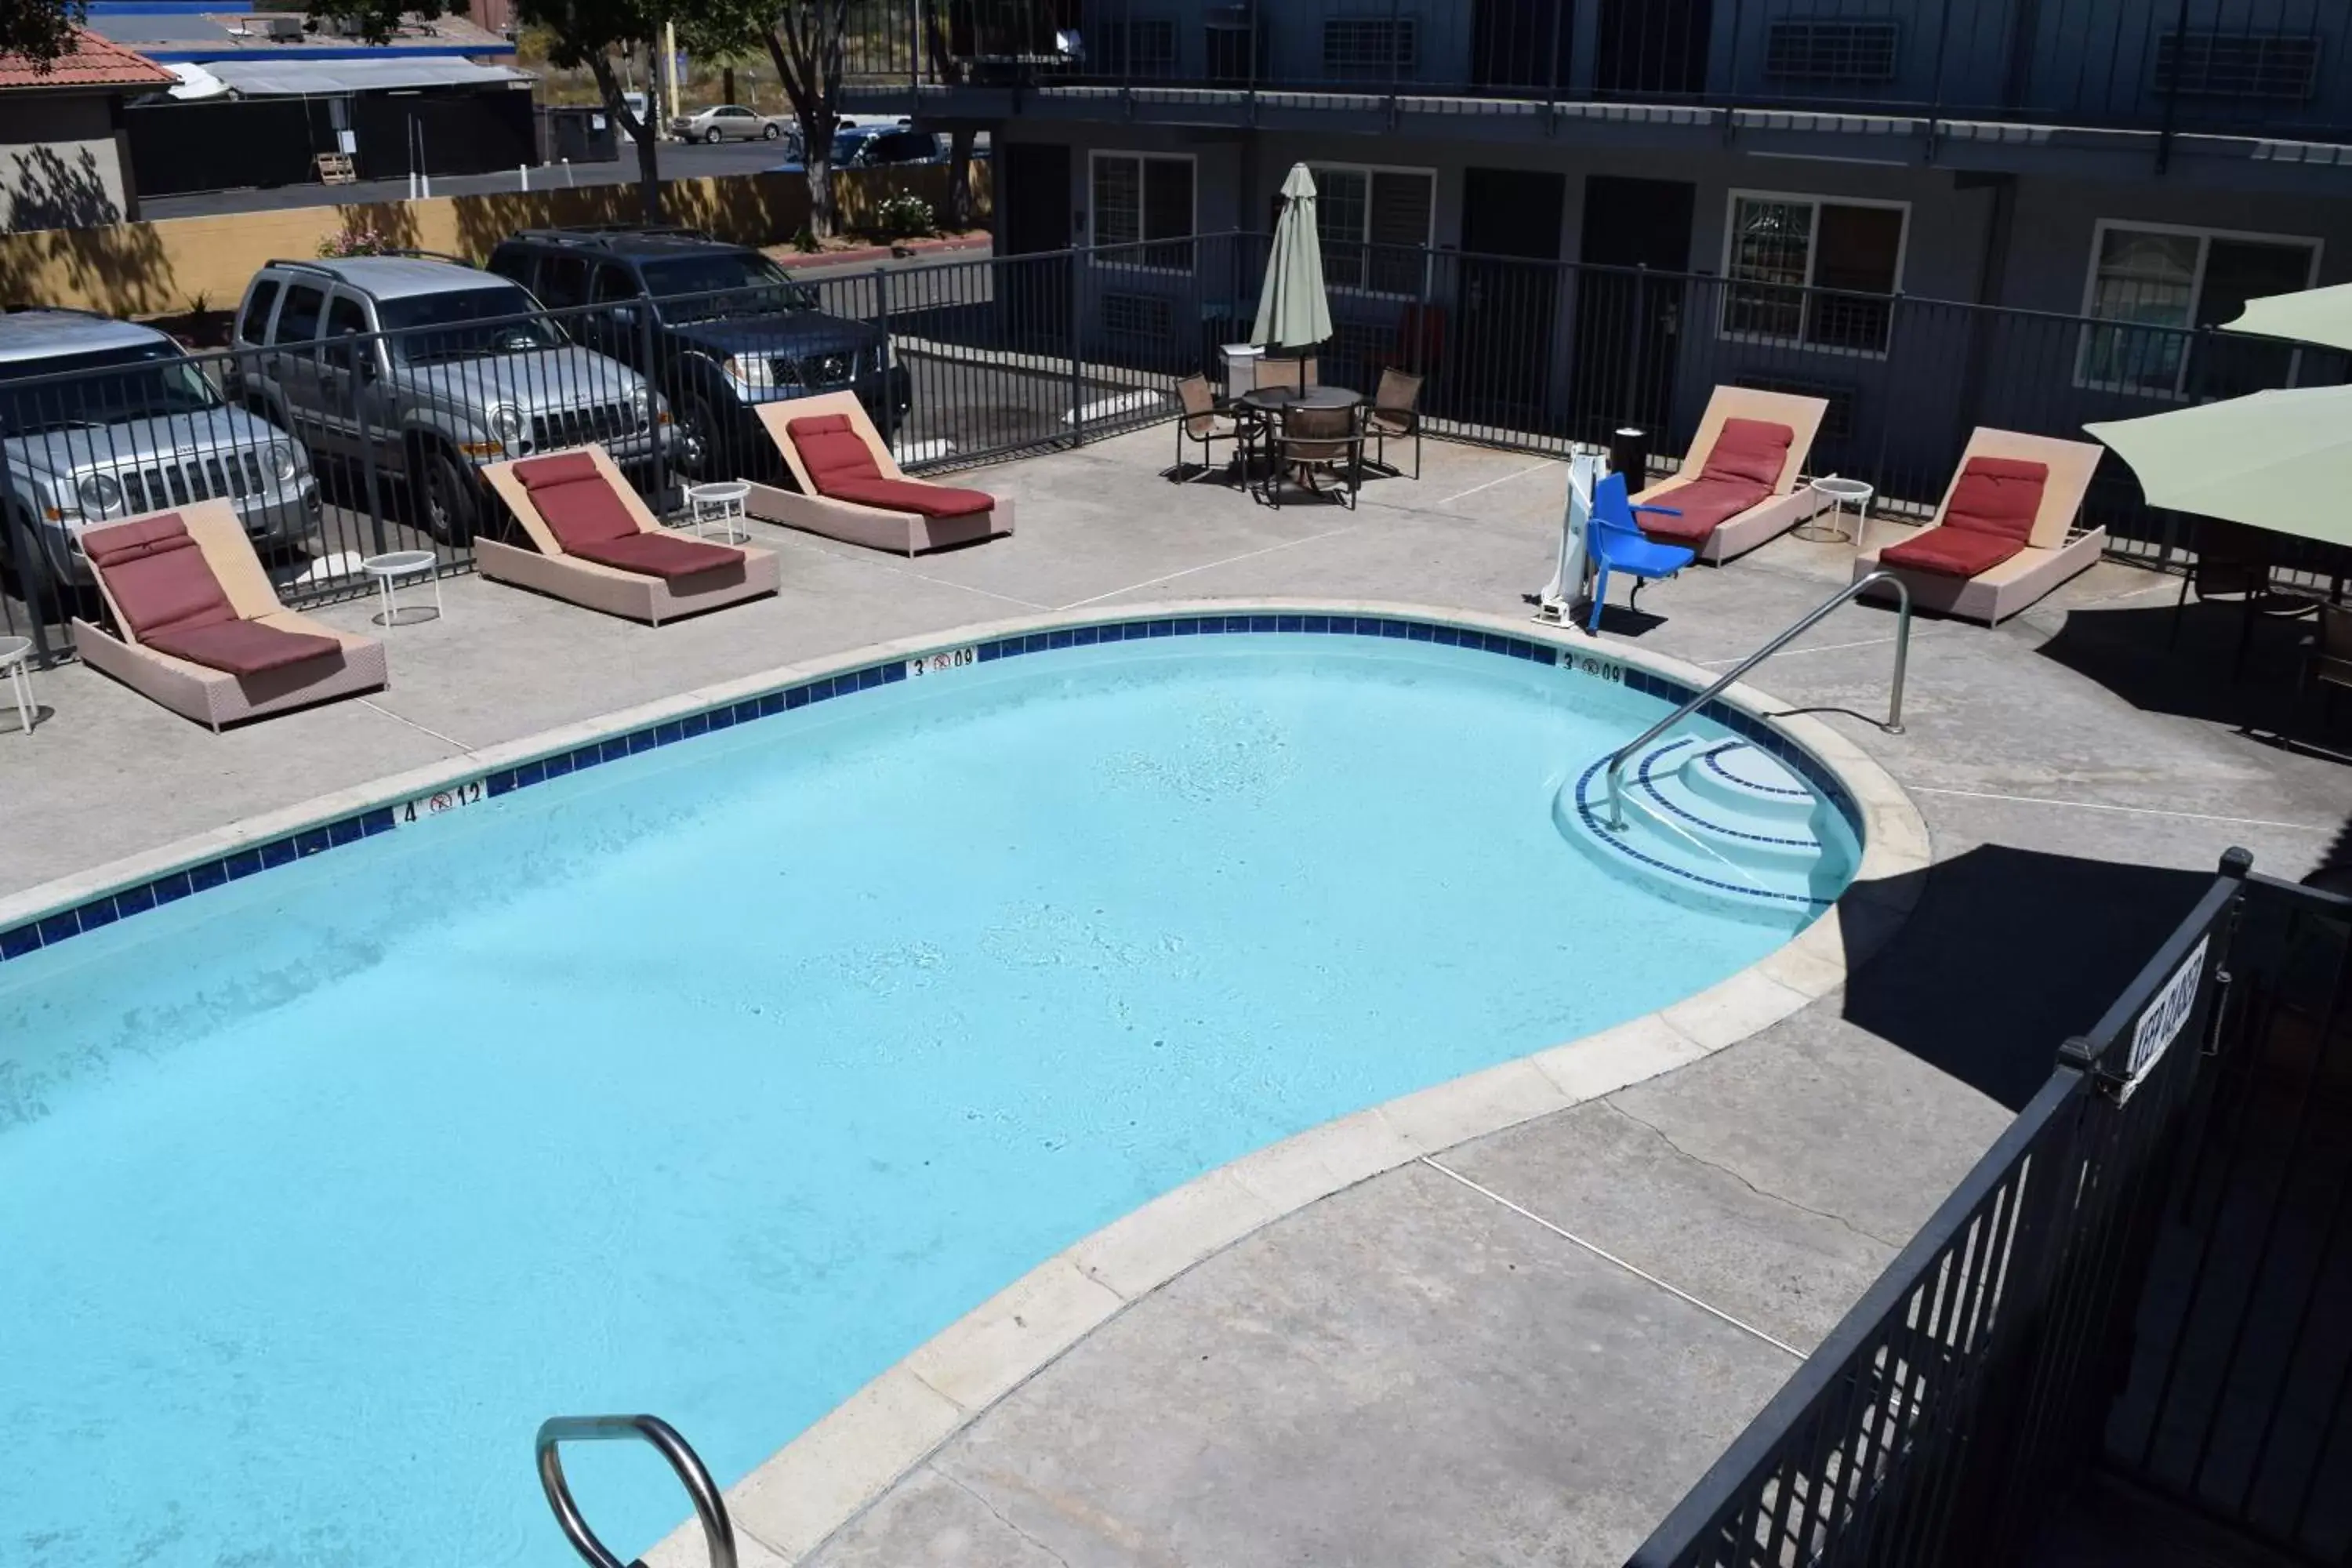 Area and facilities, Pool View in Studio 6 Suites San Ysidro CA San Diego South Bay